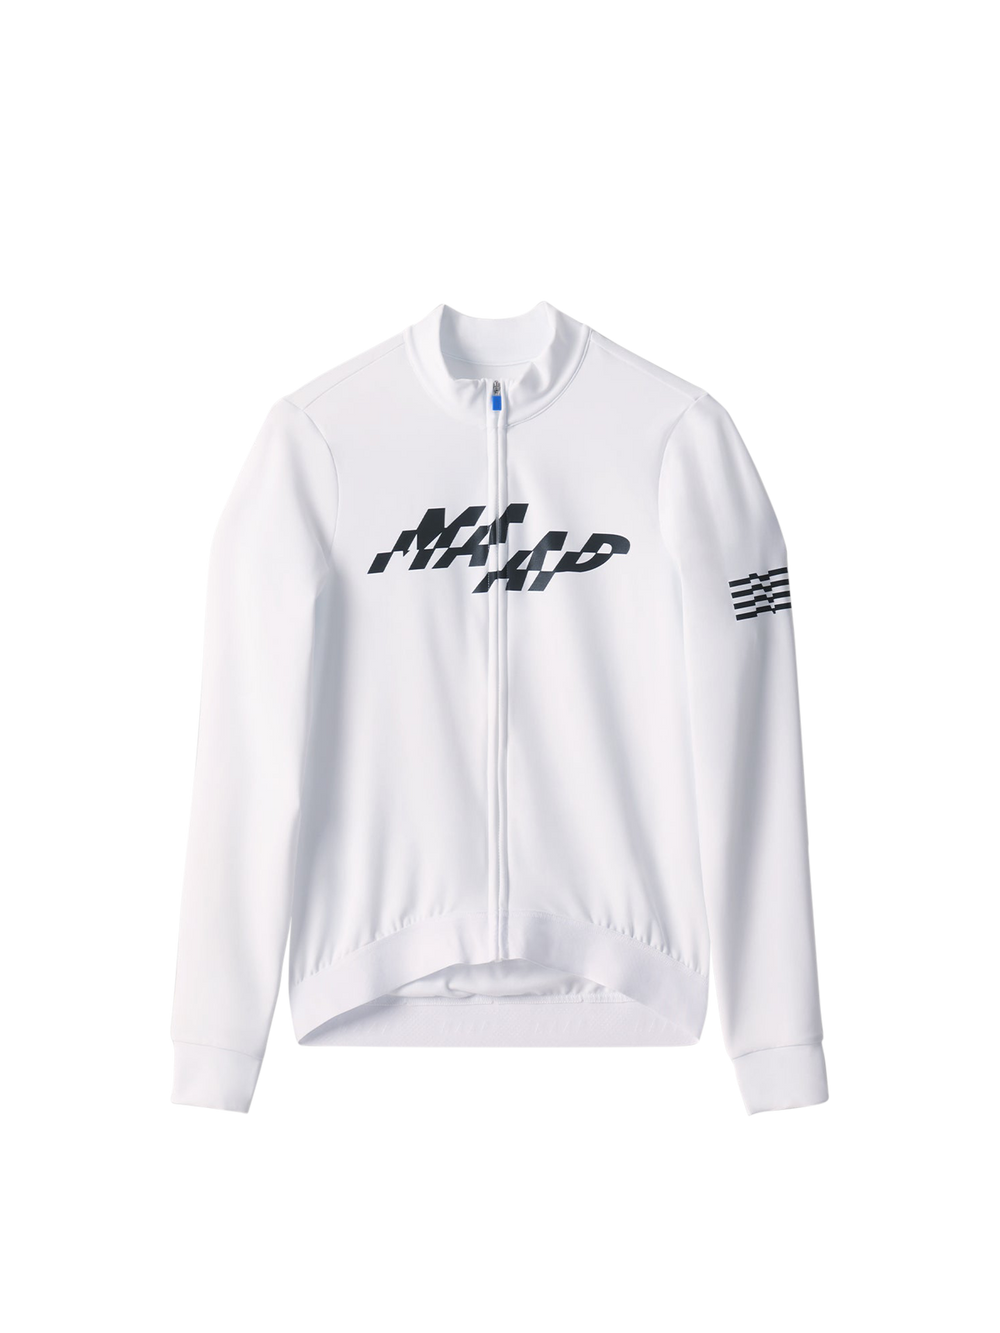 Product Image for Women's Fragment Thermal LS Jersey 2.0